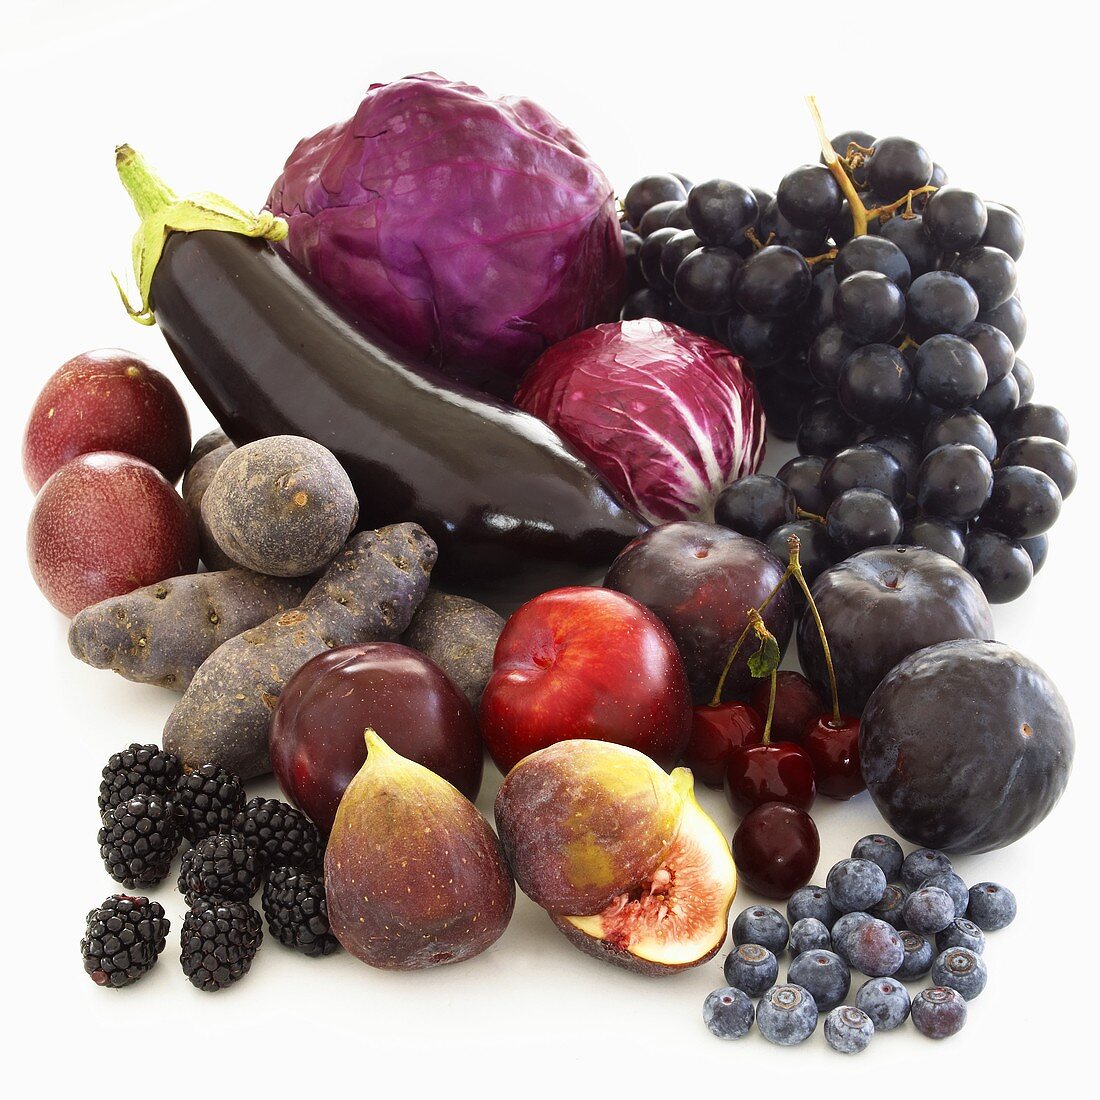 Still life with purple fruit and vegetables